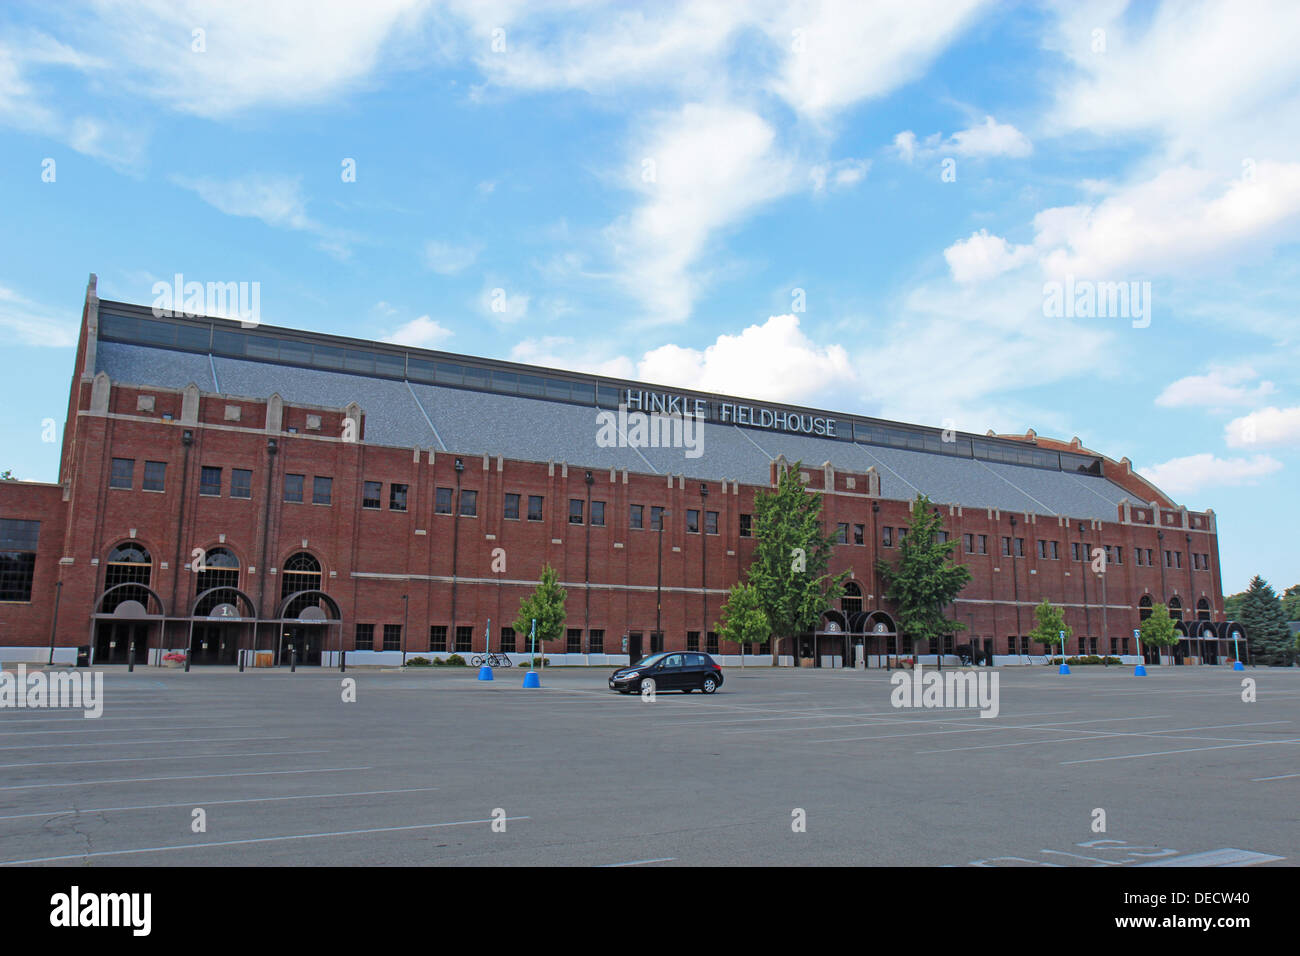 Hinkle Fieldhouse on the Butler University campus Stock Photo